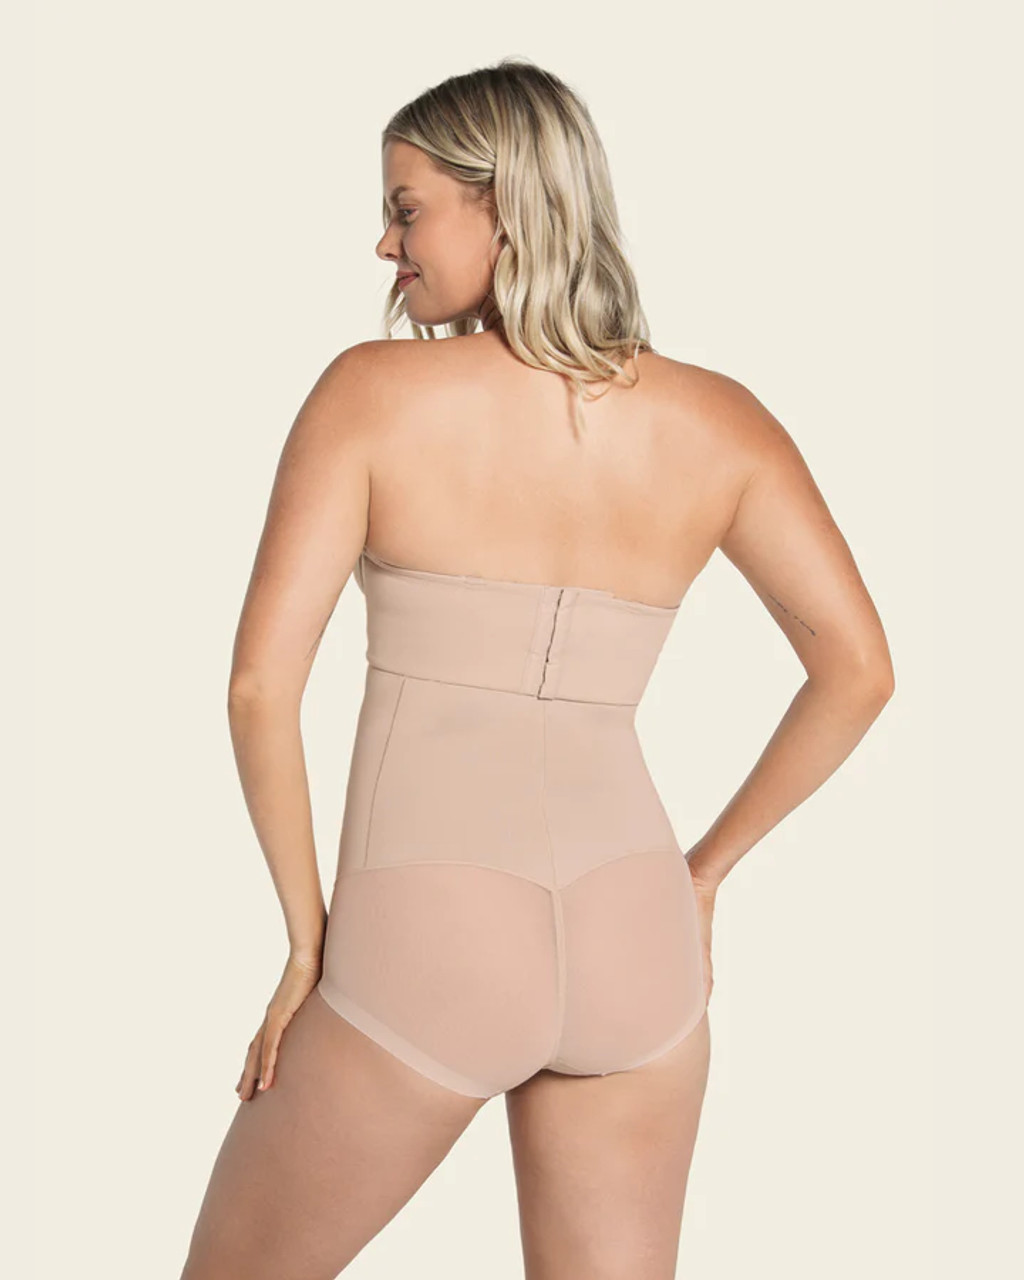 LEONISA Extra High-Waisted Sheer Bottom Sculpting Shaper Panty